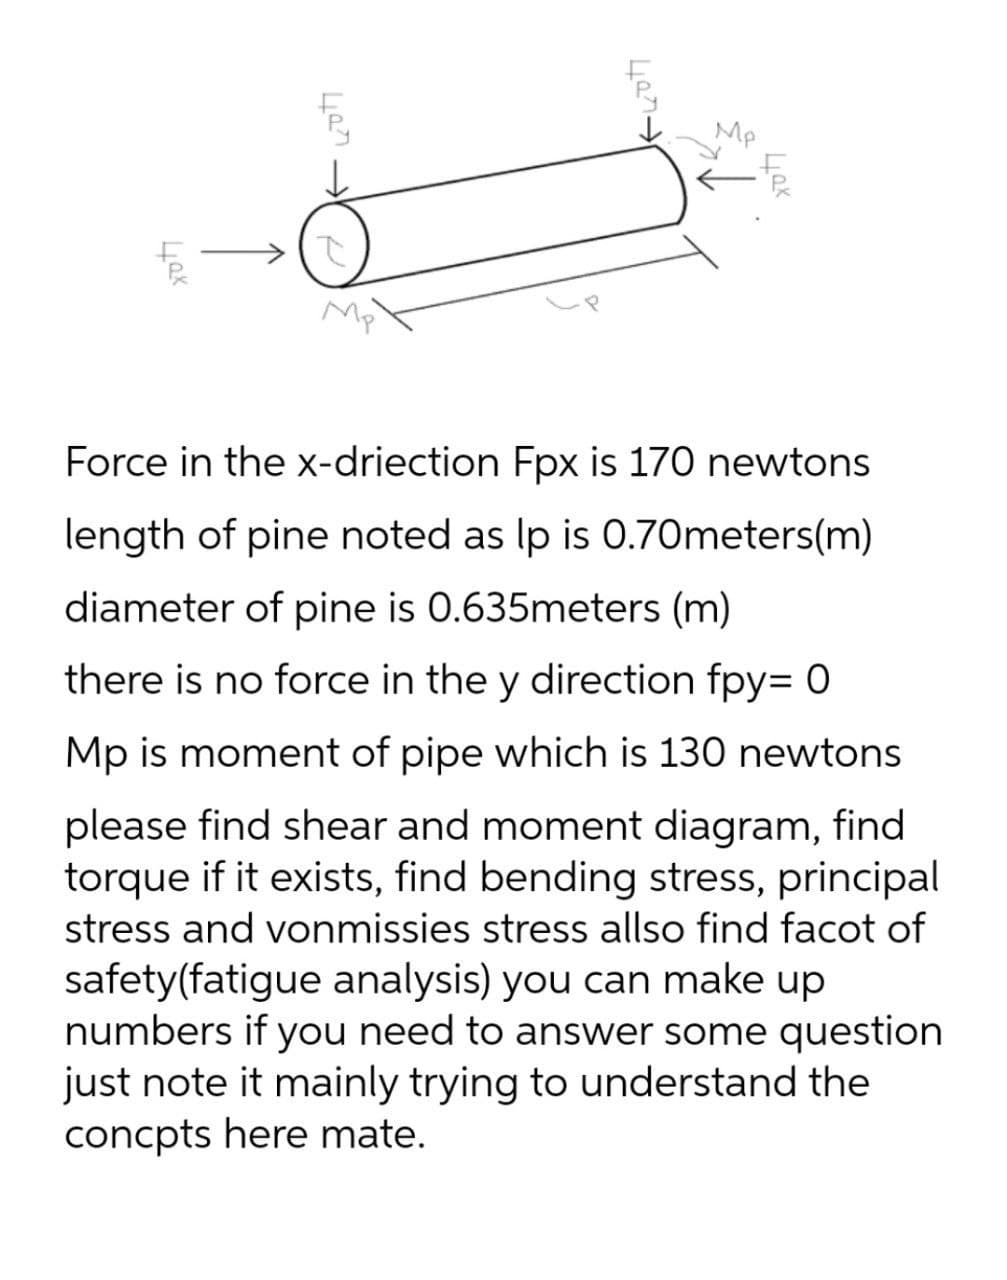 x077
487
Mp
40x
Mp
Force in the x-driection Fpx is 170 newtons
length of pine noted as lp is 0.70meters(m)
diameter of pine is 0.635meters (m)
there is no force in the y direction fpy= 0
Mp is moment of pipe which is 130 newtons
please find shear and moment diagram, find
torque if it exists, find bending stress, principal
stress and vonmissies stress allso find facot of
safety(fatigue analysis) you can make up
numbers if you need to answer some question
just note it mainly trying to understand the
concpts here mate.